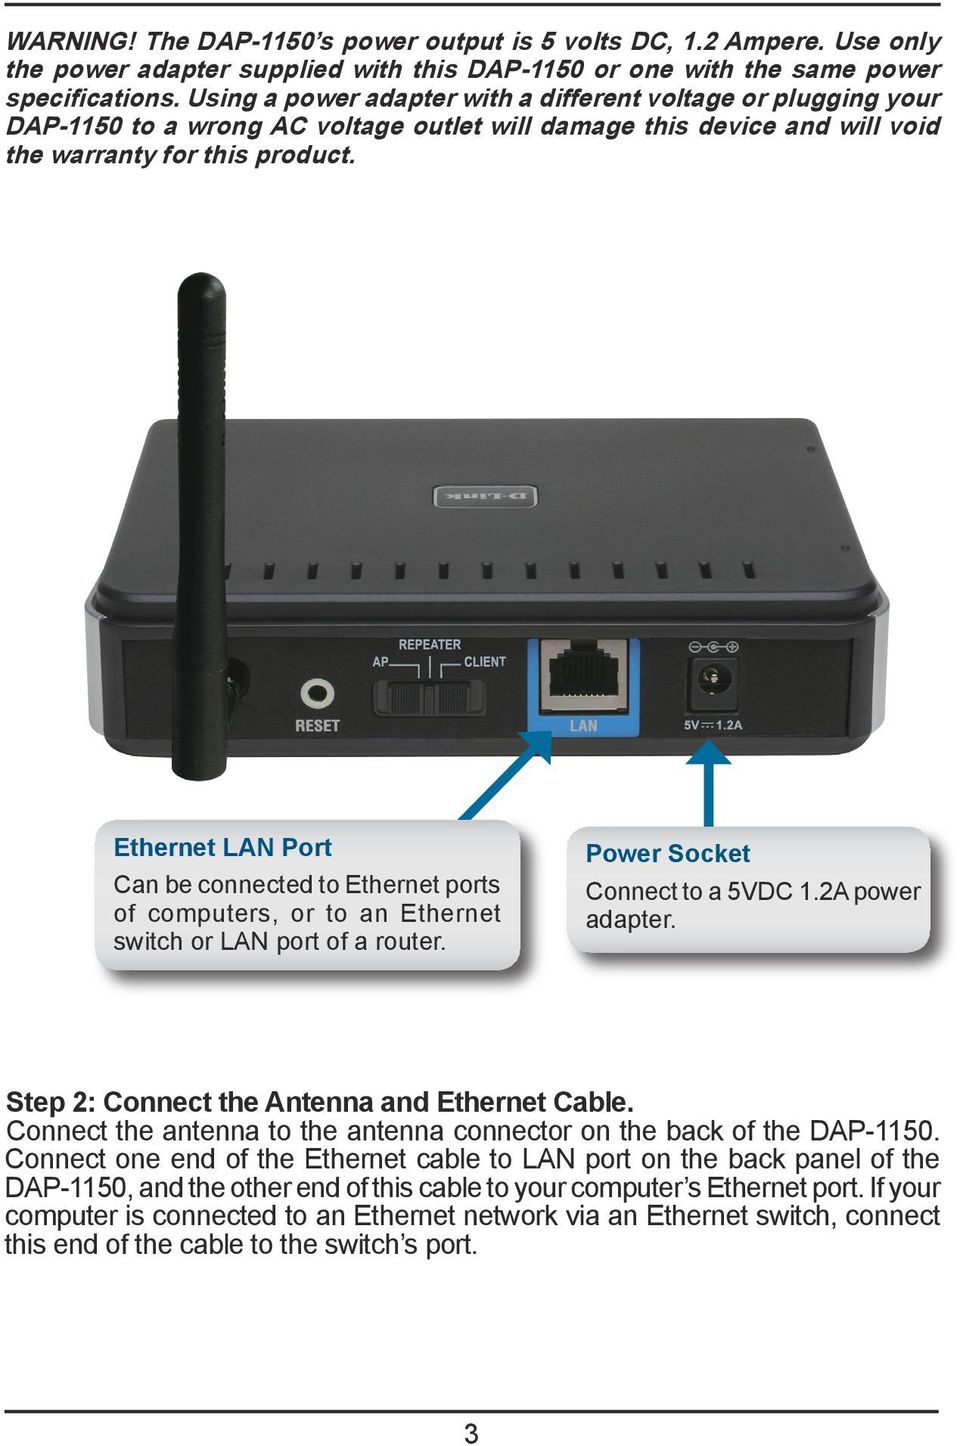 Ethernet LAN Port Can be connected to Ethernet ports of computers, or to an Ethernet switch or LAN port of a router. Power Socket Connect to a 5VDC 1.2A power adapter.